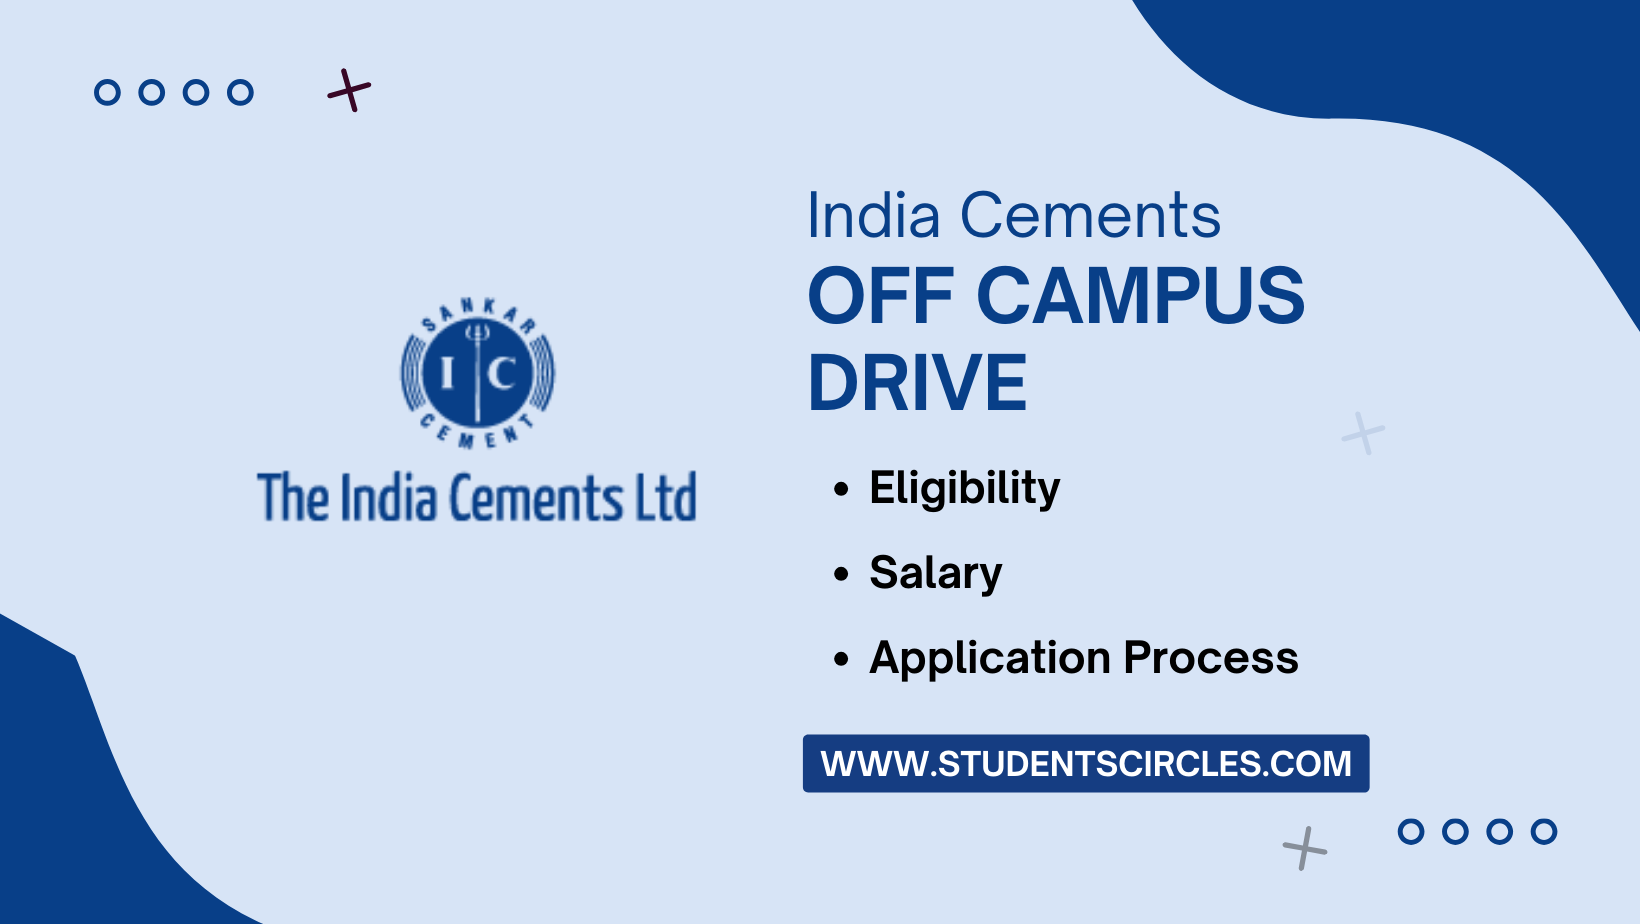 India Cements Off Campus Drive